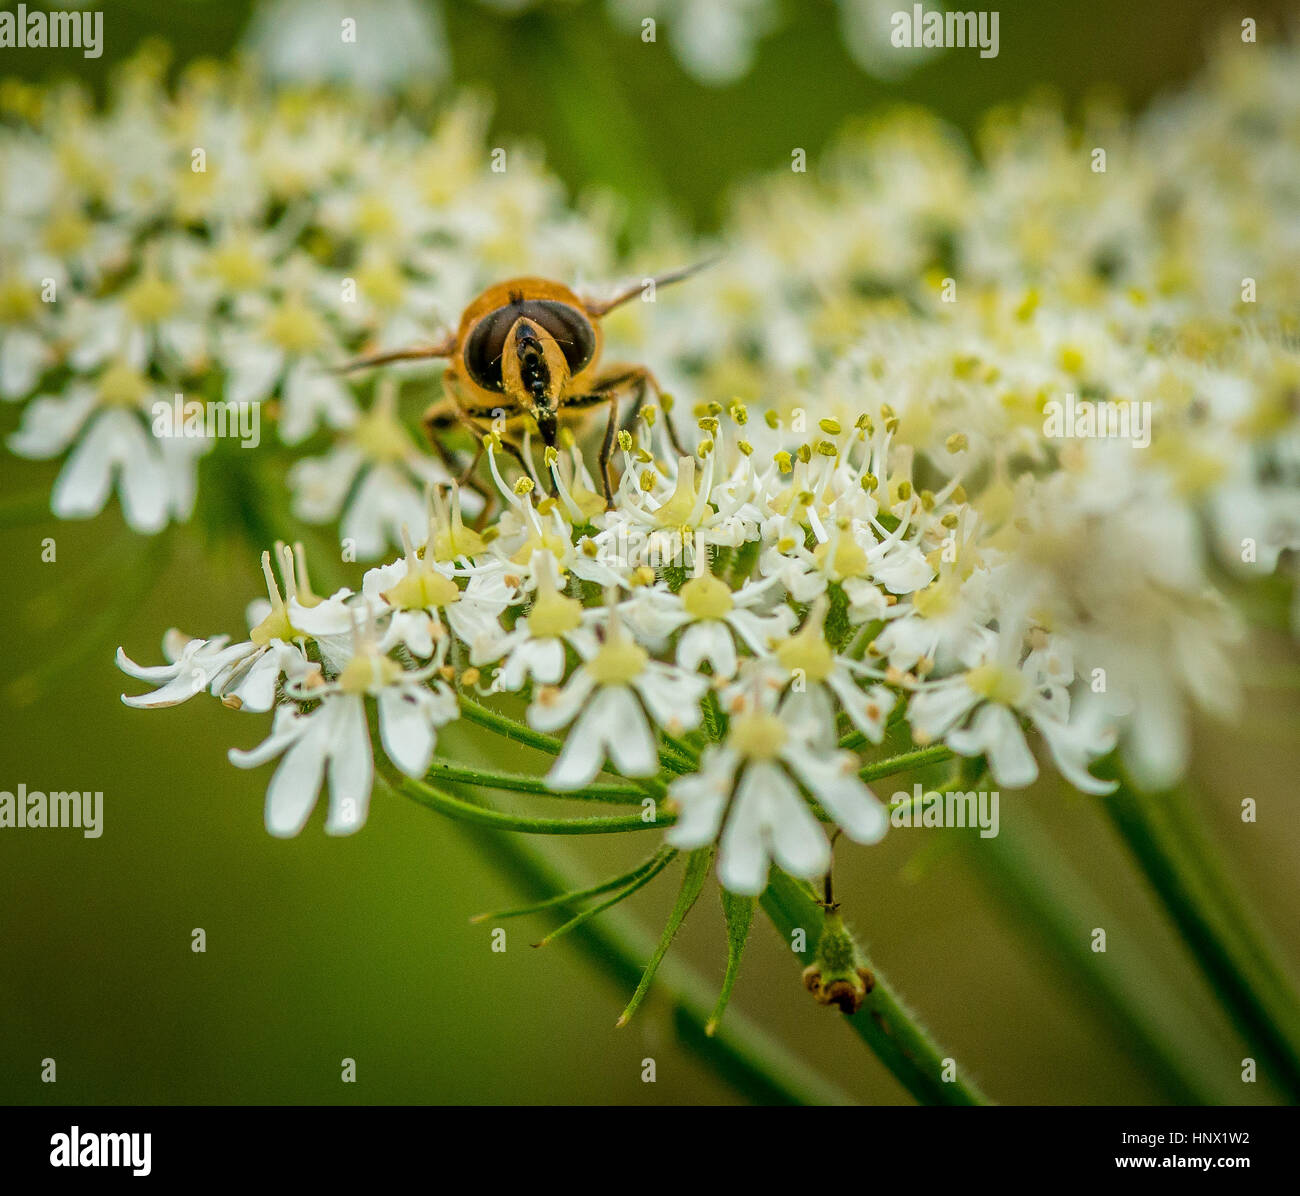 Hover Fly Stock Photo